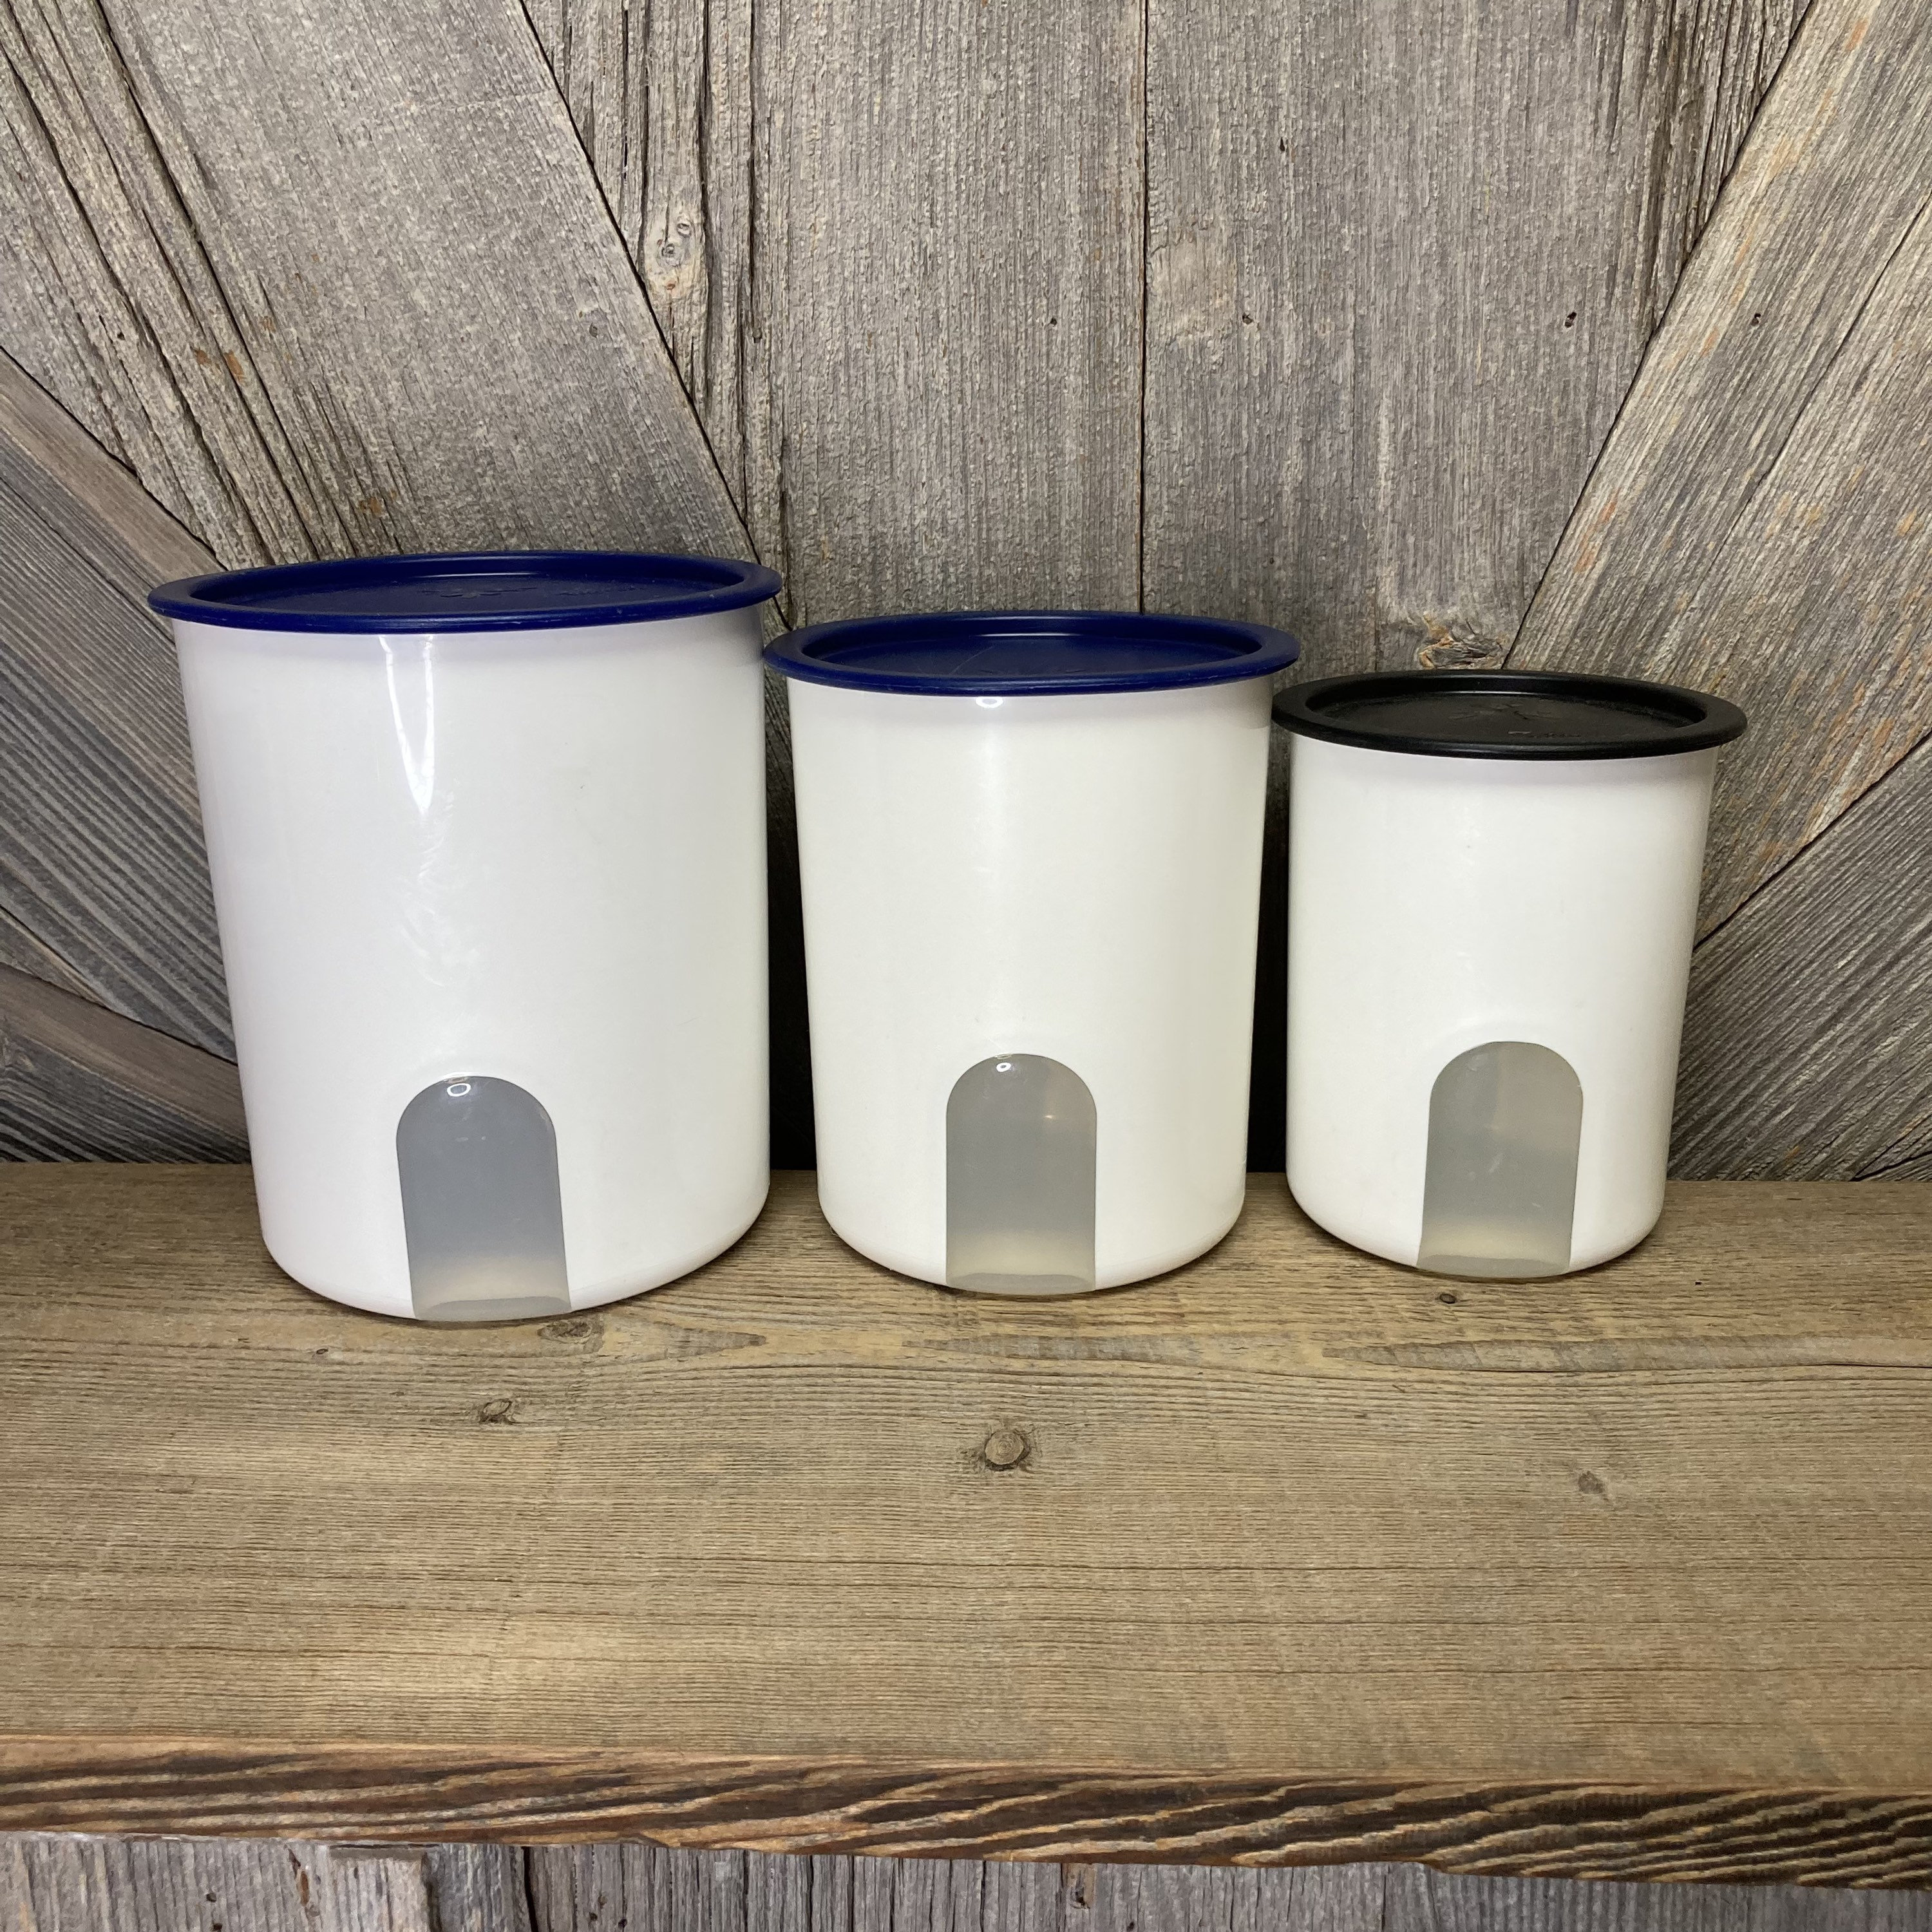 New Tupperware Tupperware One Touch Canister Set of 3